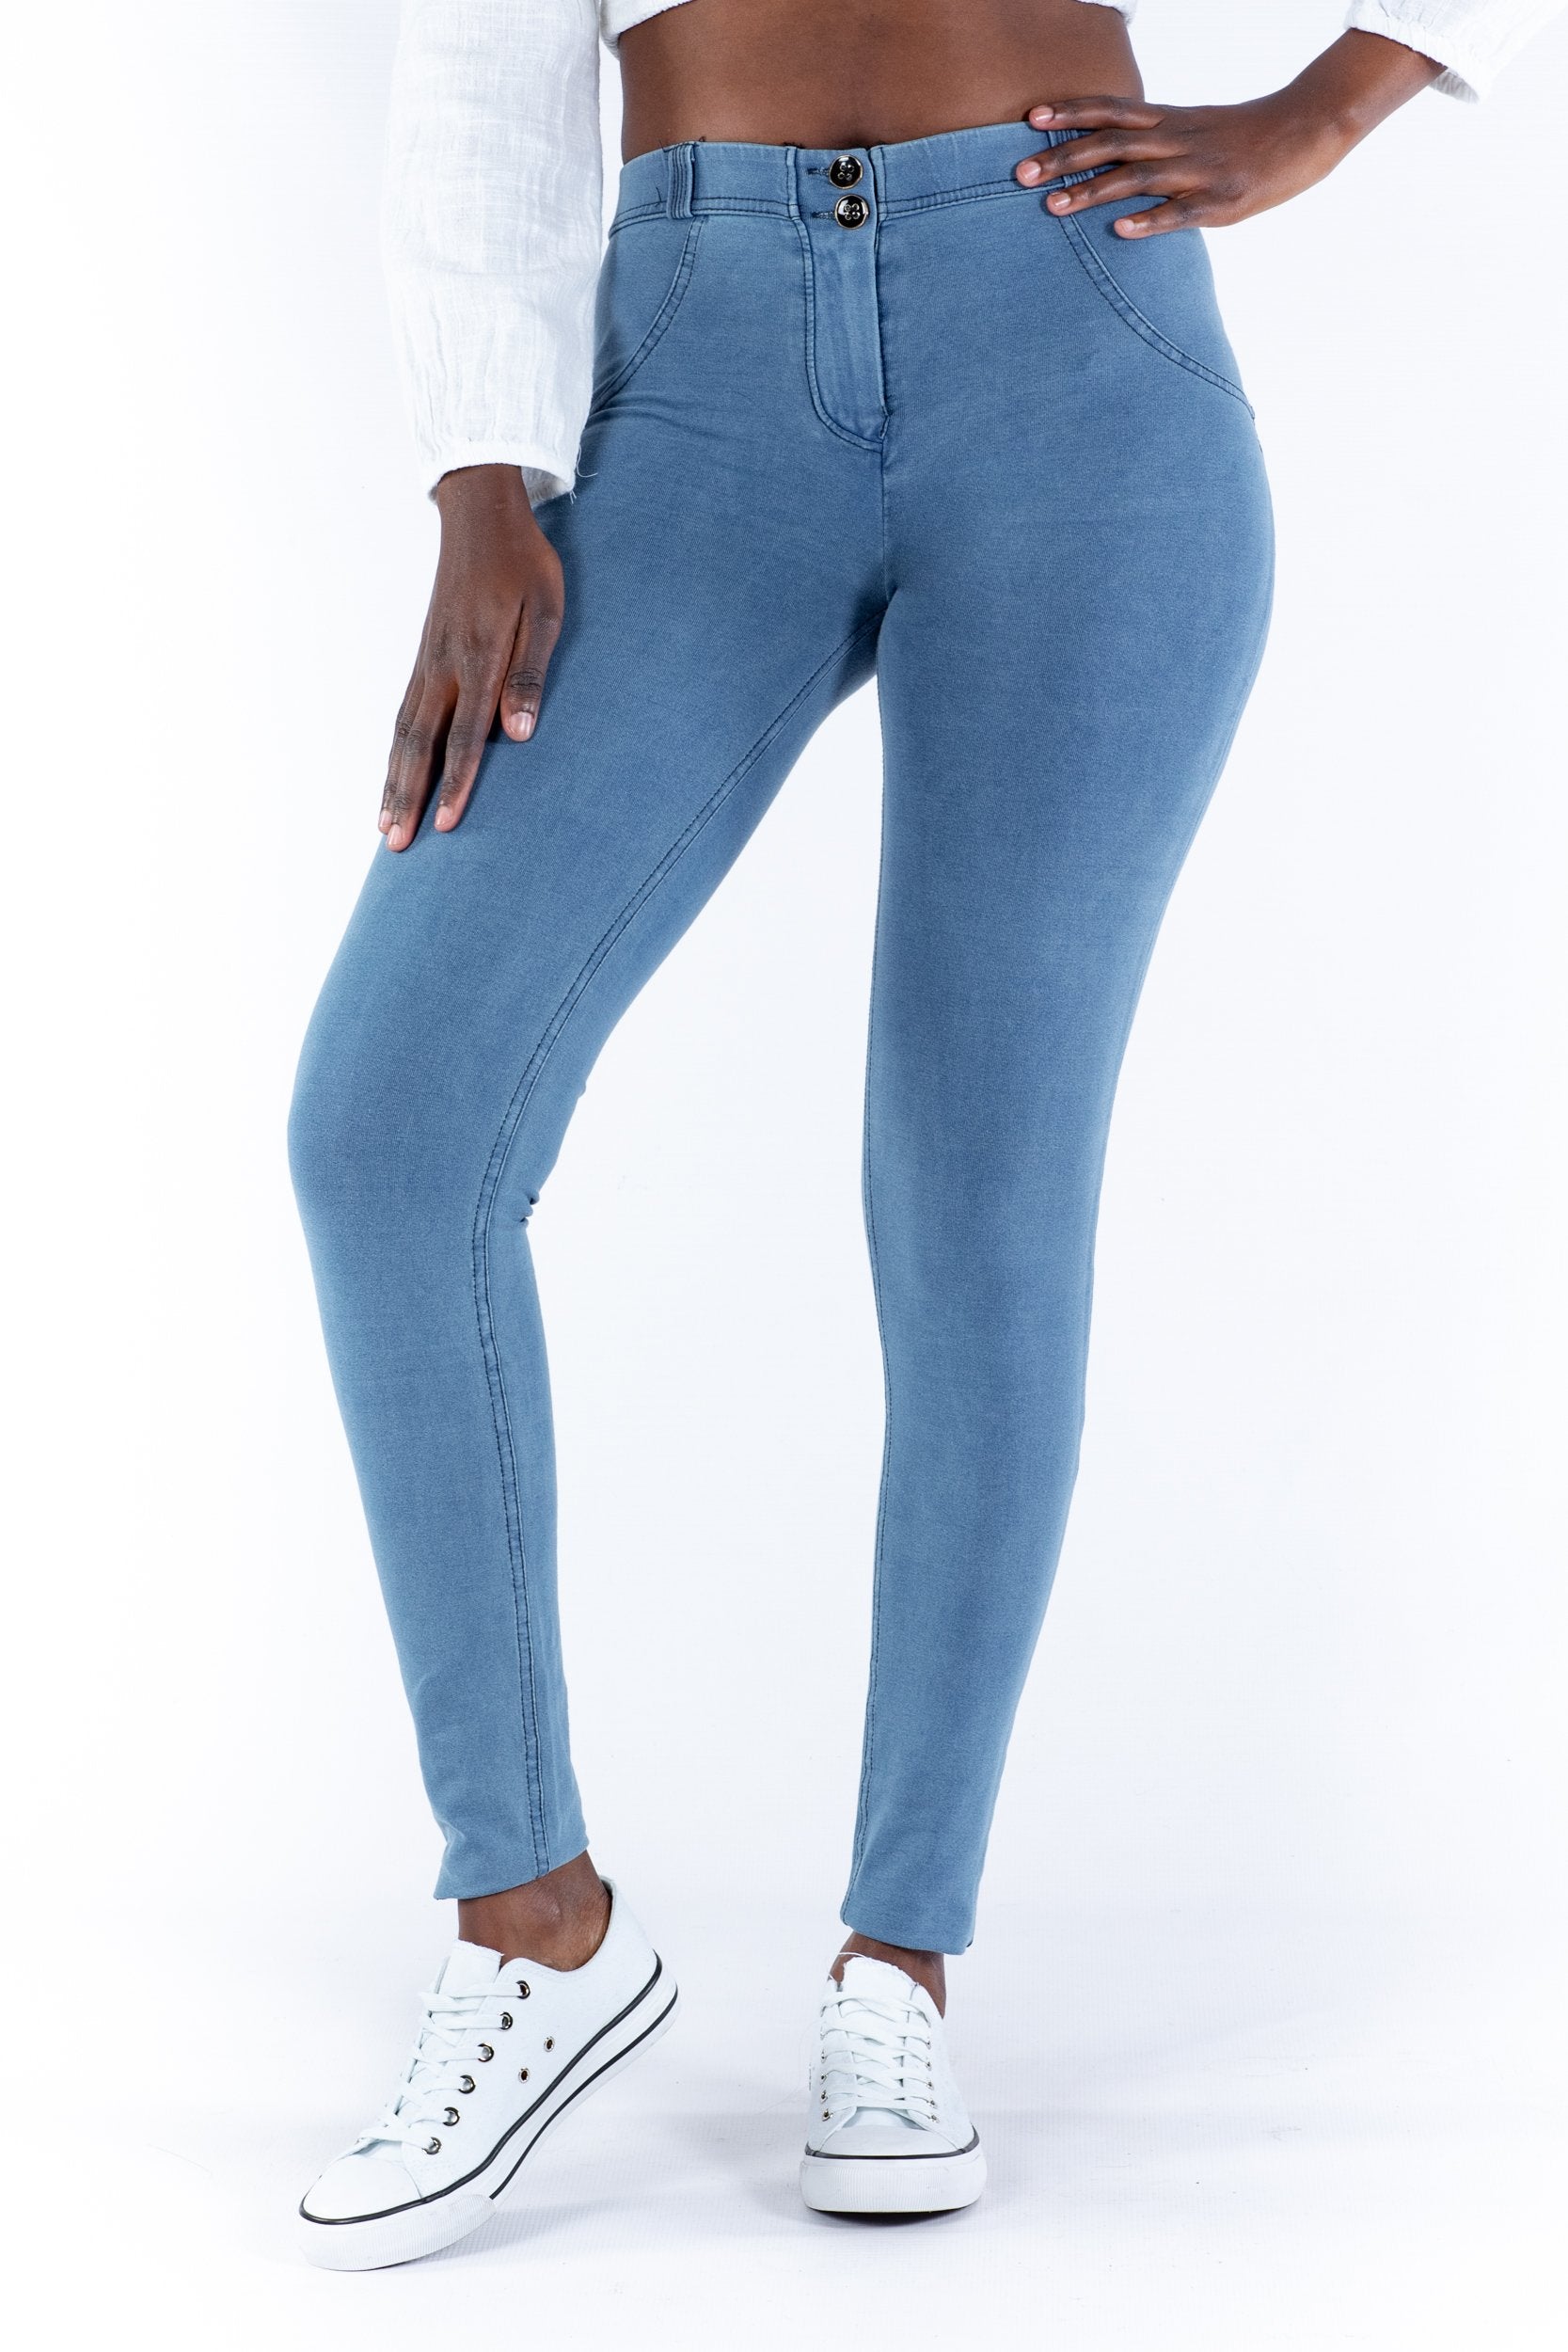 Image of Mid waist Butt lifting Shaping pants Jeggings -light Blue